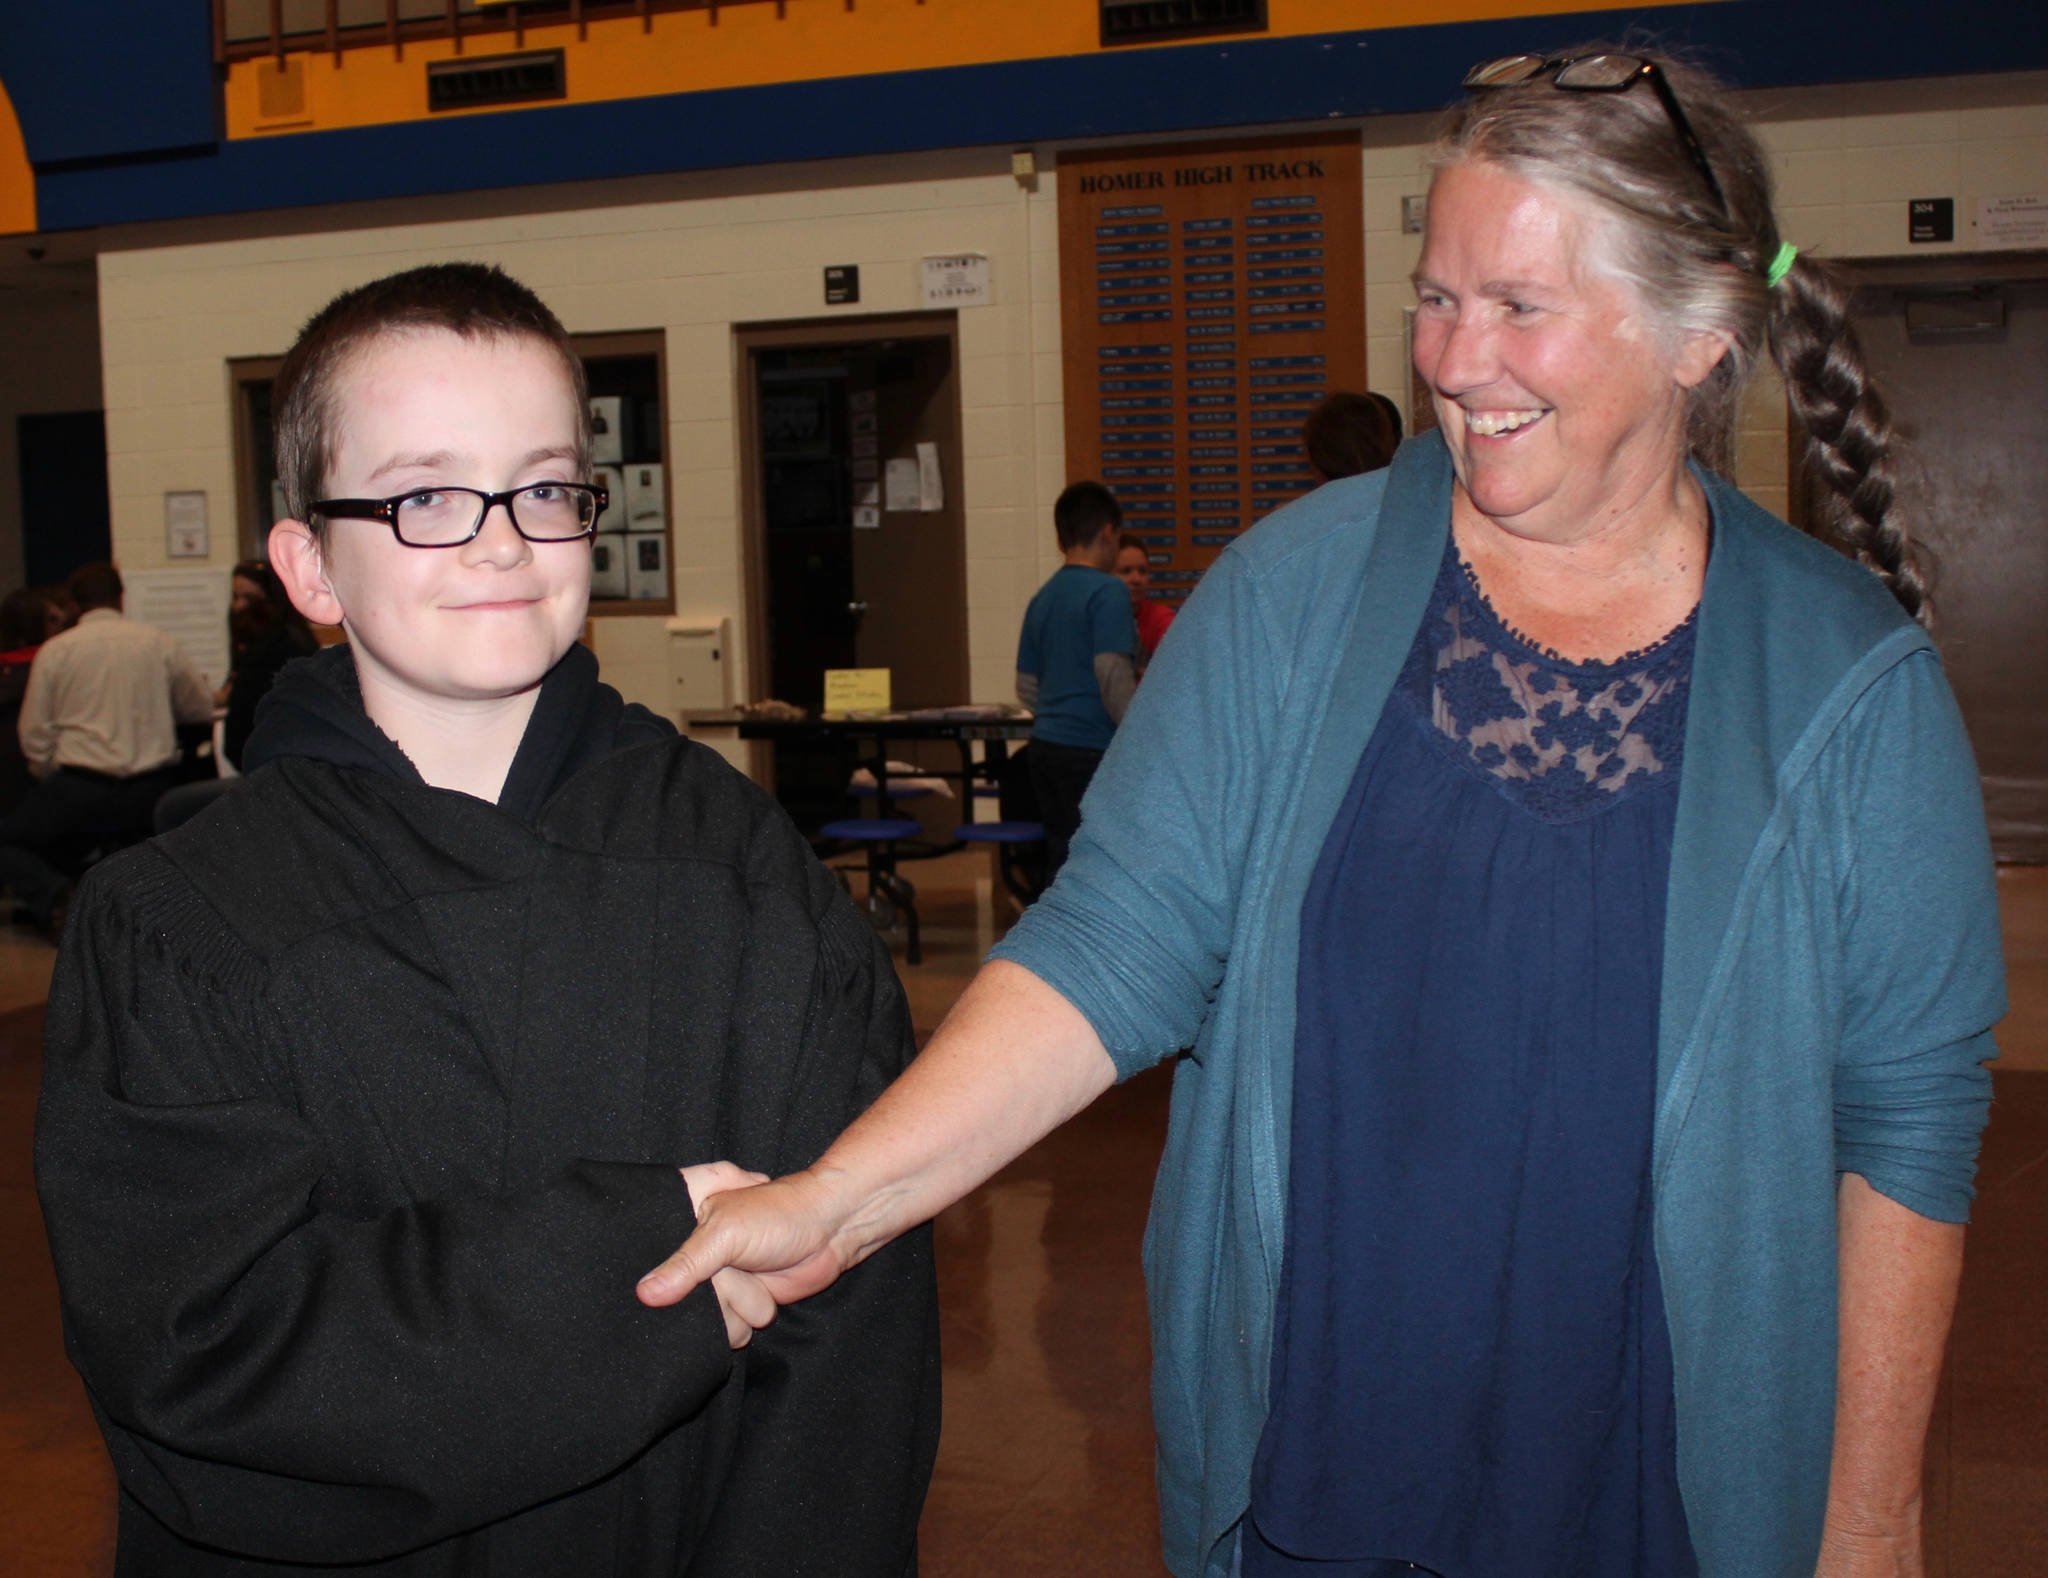 Here comes the judge! At the Aug. 16 Youth After School Activities and Programs event sponsored by K-Bay Community Youth and Activities Coalition, Ethan Lurus, decked out in a judge’s robe, shakes hands with Ginny Espinshade, Kenai Peninsula Youth Court executive director. (Photo by McKibben Jackinsky, for the Homer News)